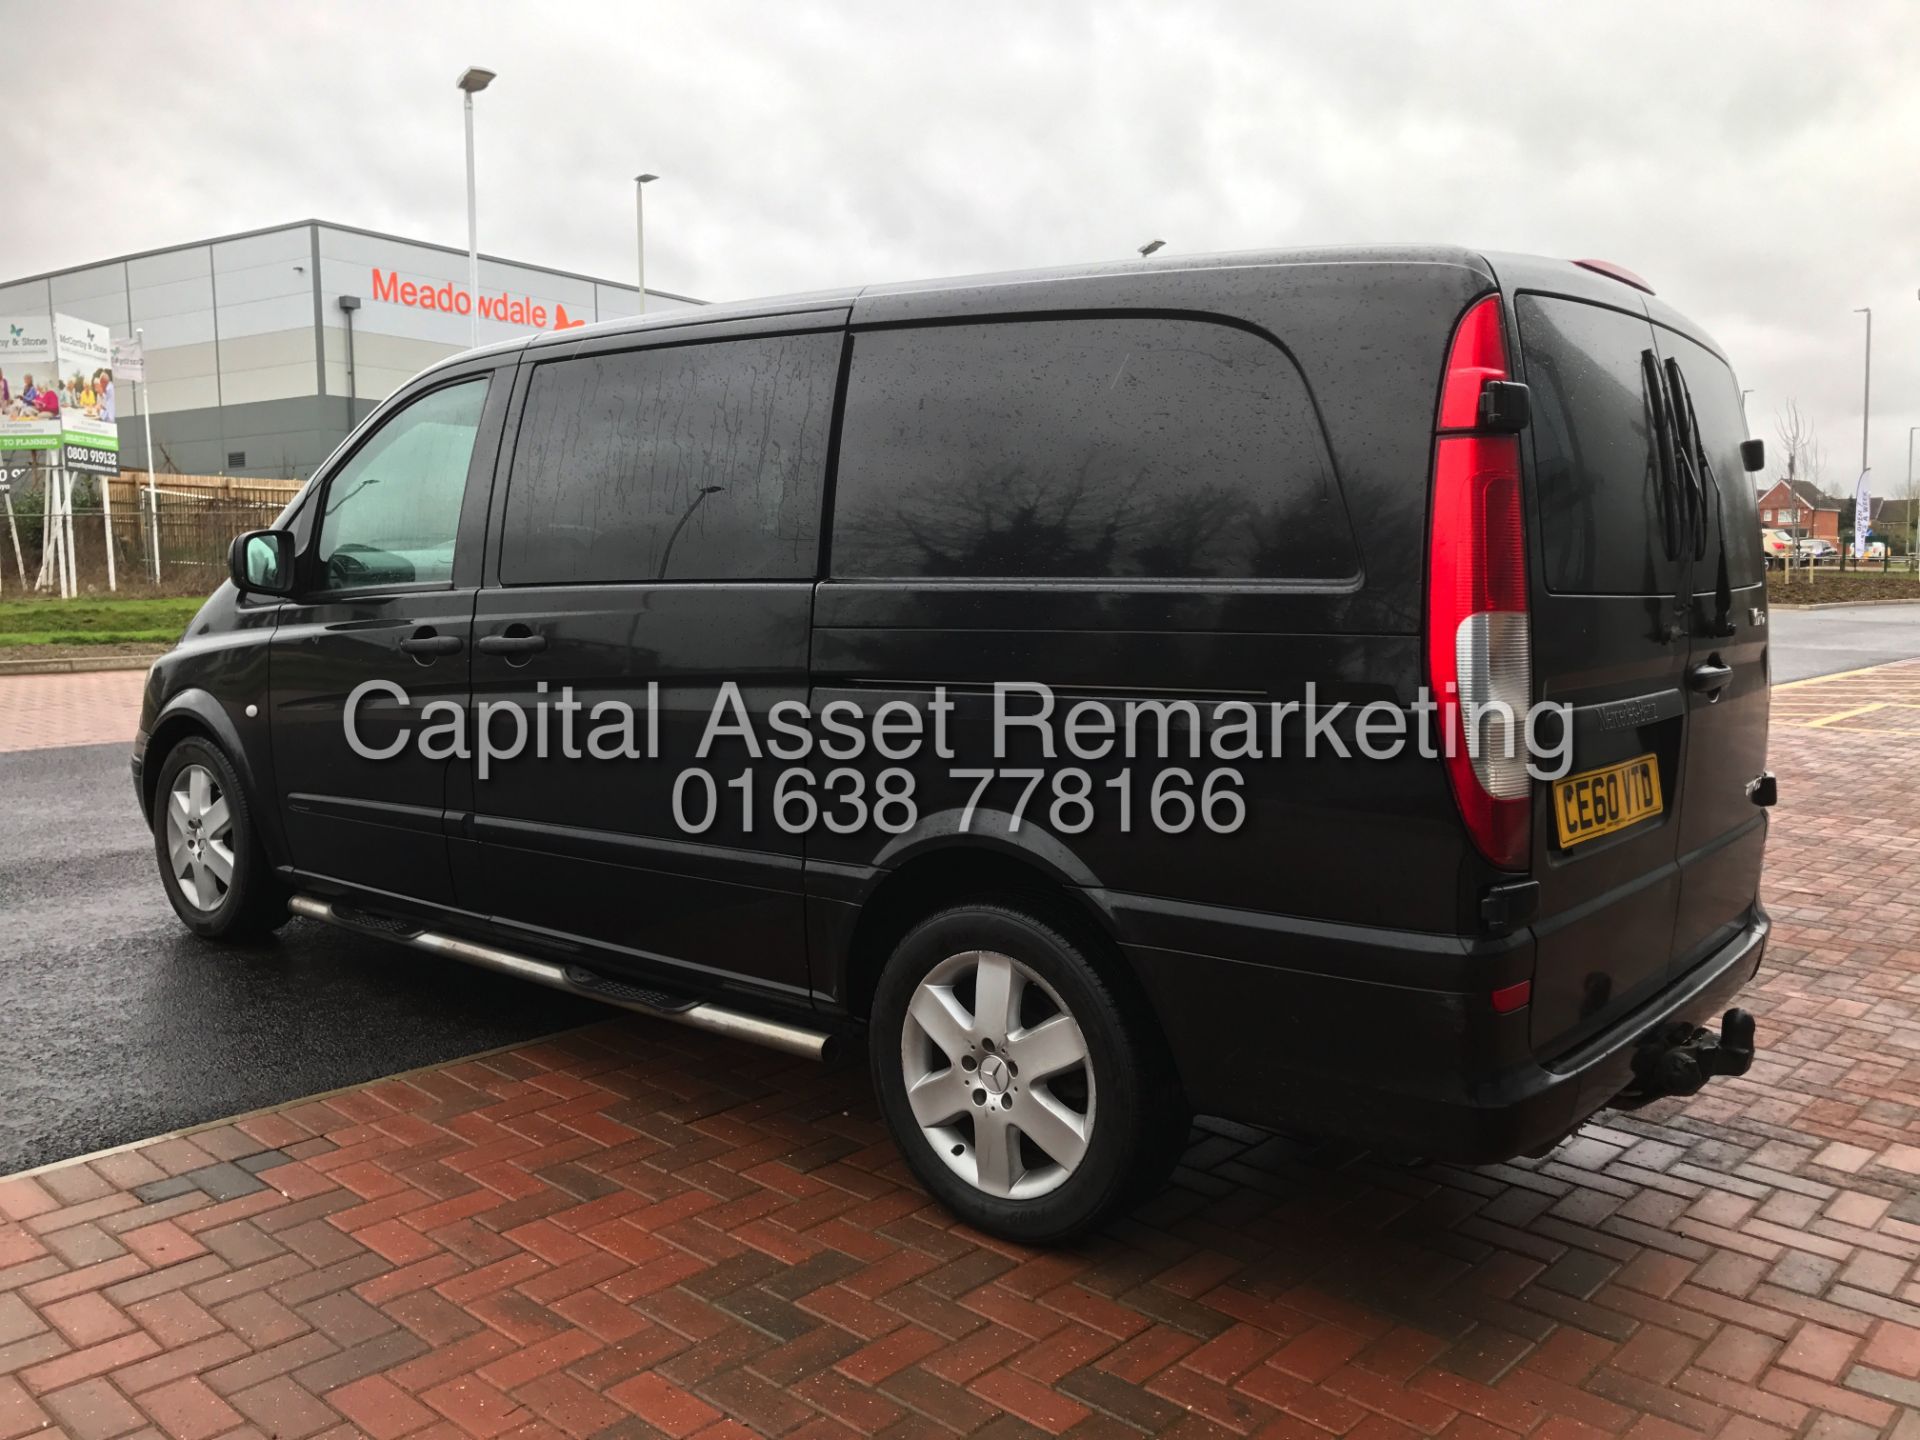 (ON SALE) MERCEDES VITO "SPORTY - 115BHP" LWB (2011 MODEL) 5 SEATER DUELINER -1 OWNER-AIR CON-ALLOYS - Bild 7 aus 18